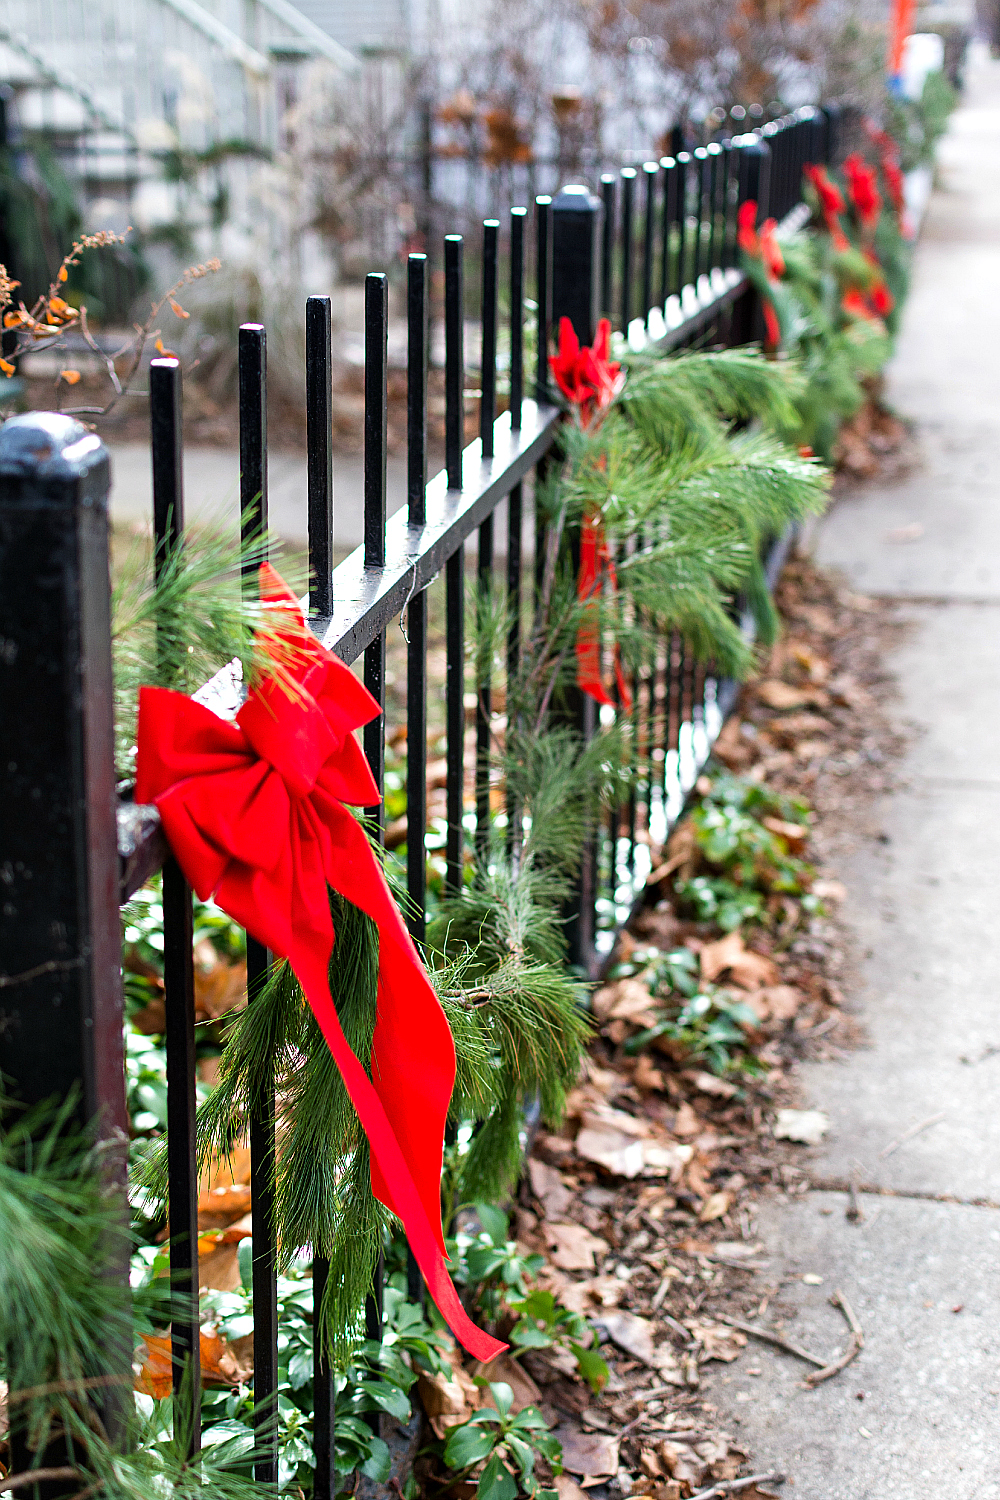 How to Decorate Garden Fence for Christmas